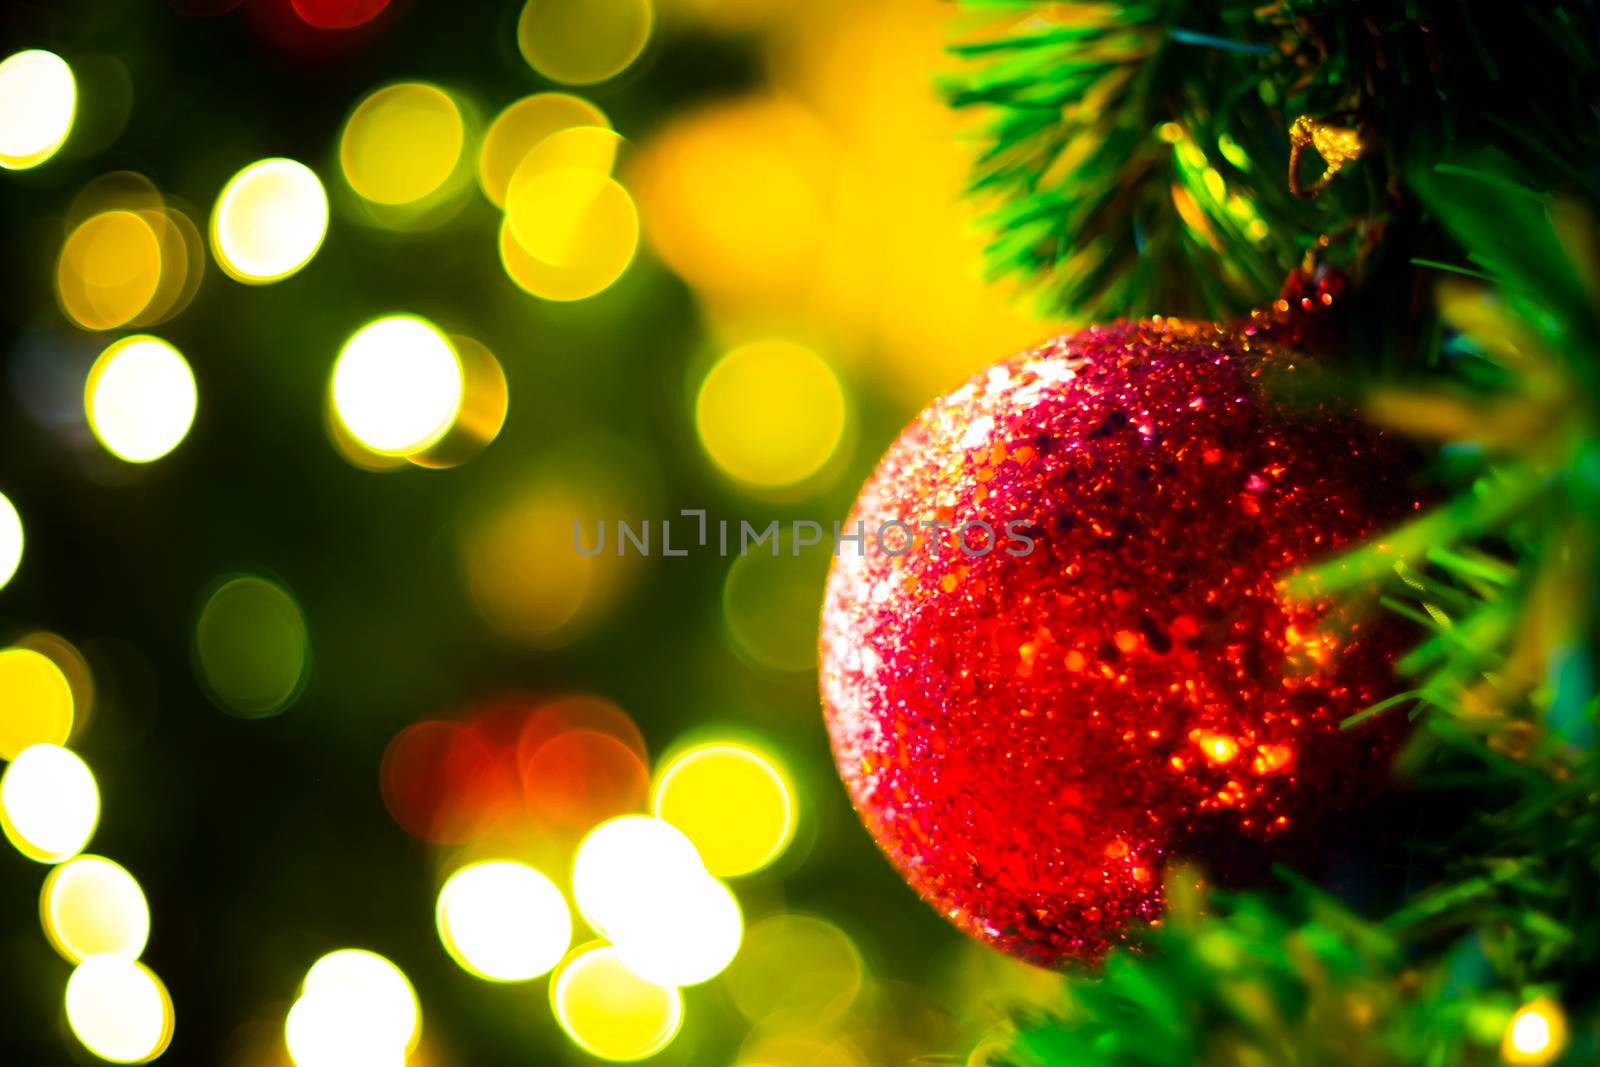 Decorated Christmas tree on blurred varicolored new year's background  . Christmas Ornament On Wooden Background With Snowflakes, Greeting card Merry Christmas and Happy New Year .